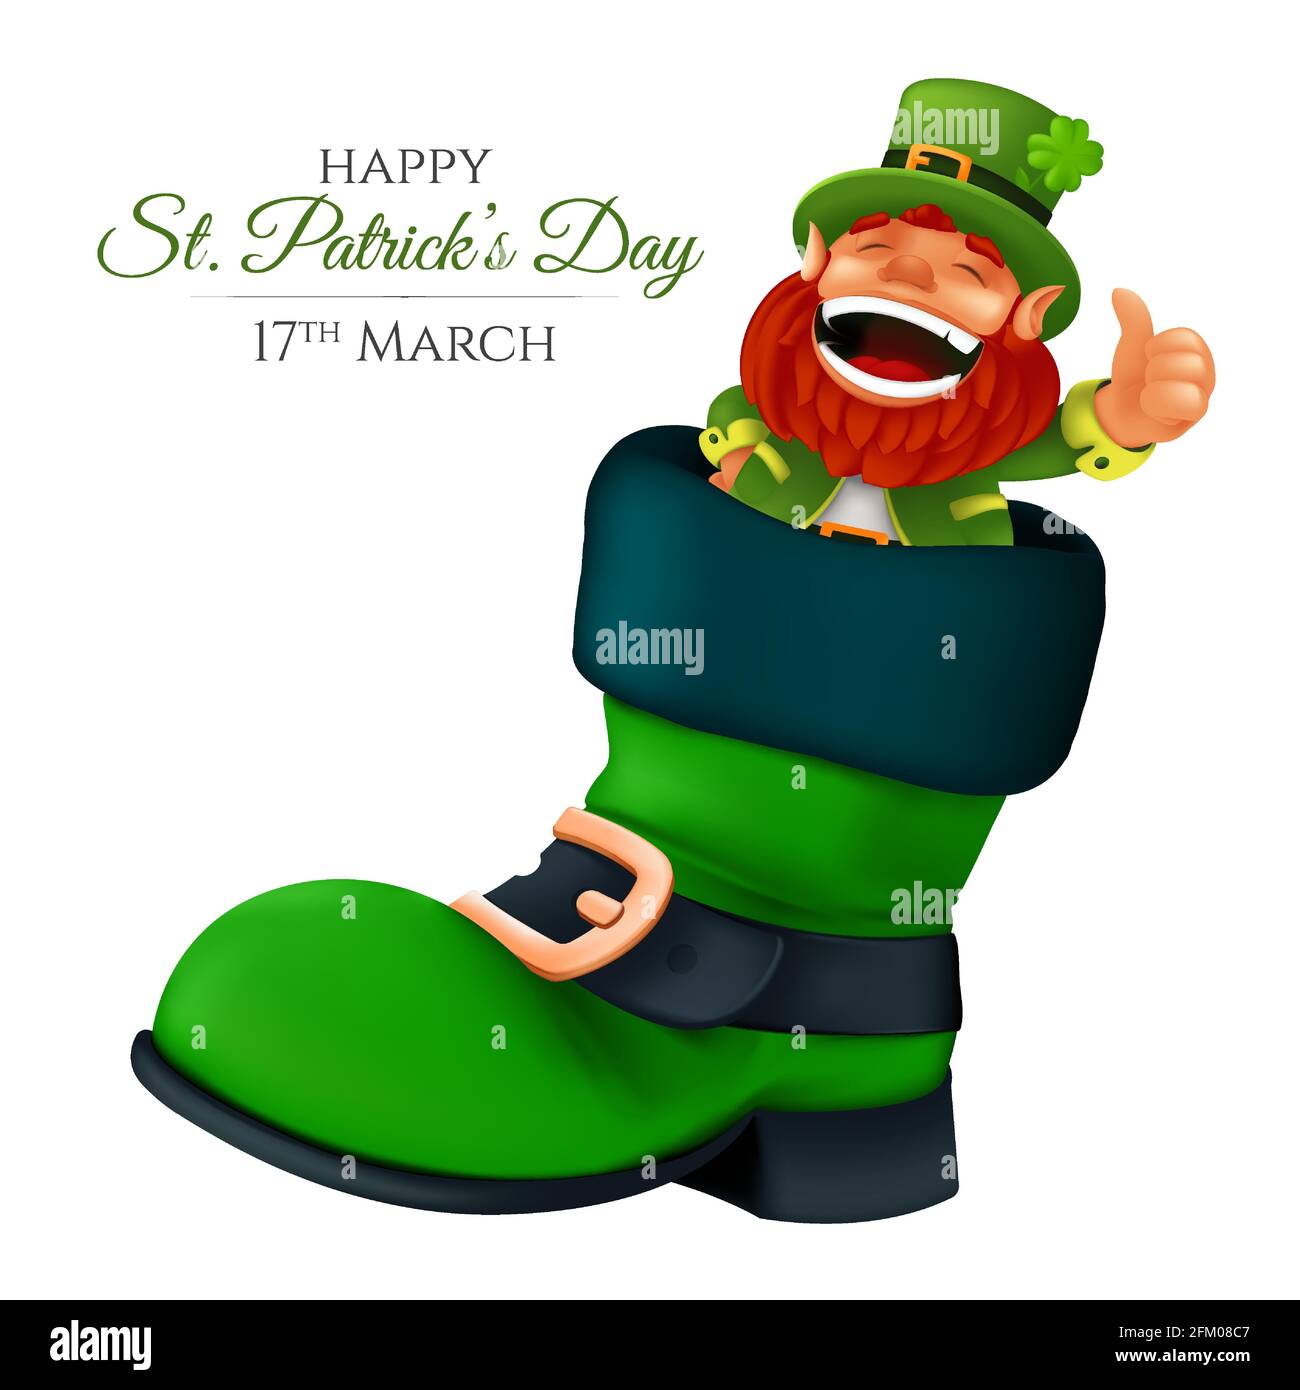 Cute bearded leprechaun peeking from the boot and showing thumbs up. Vector illustration of laughing dwarf mascot for Saint Patrick's Day isolated on Stock Vector